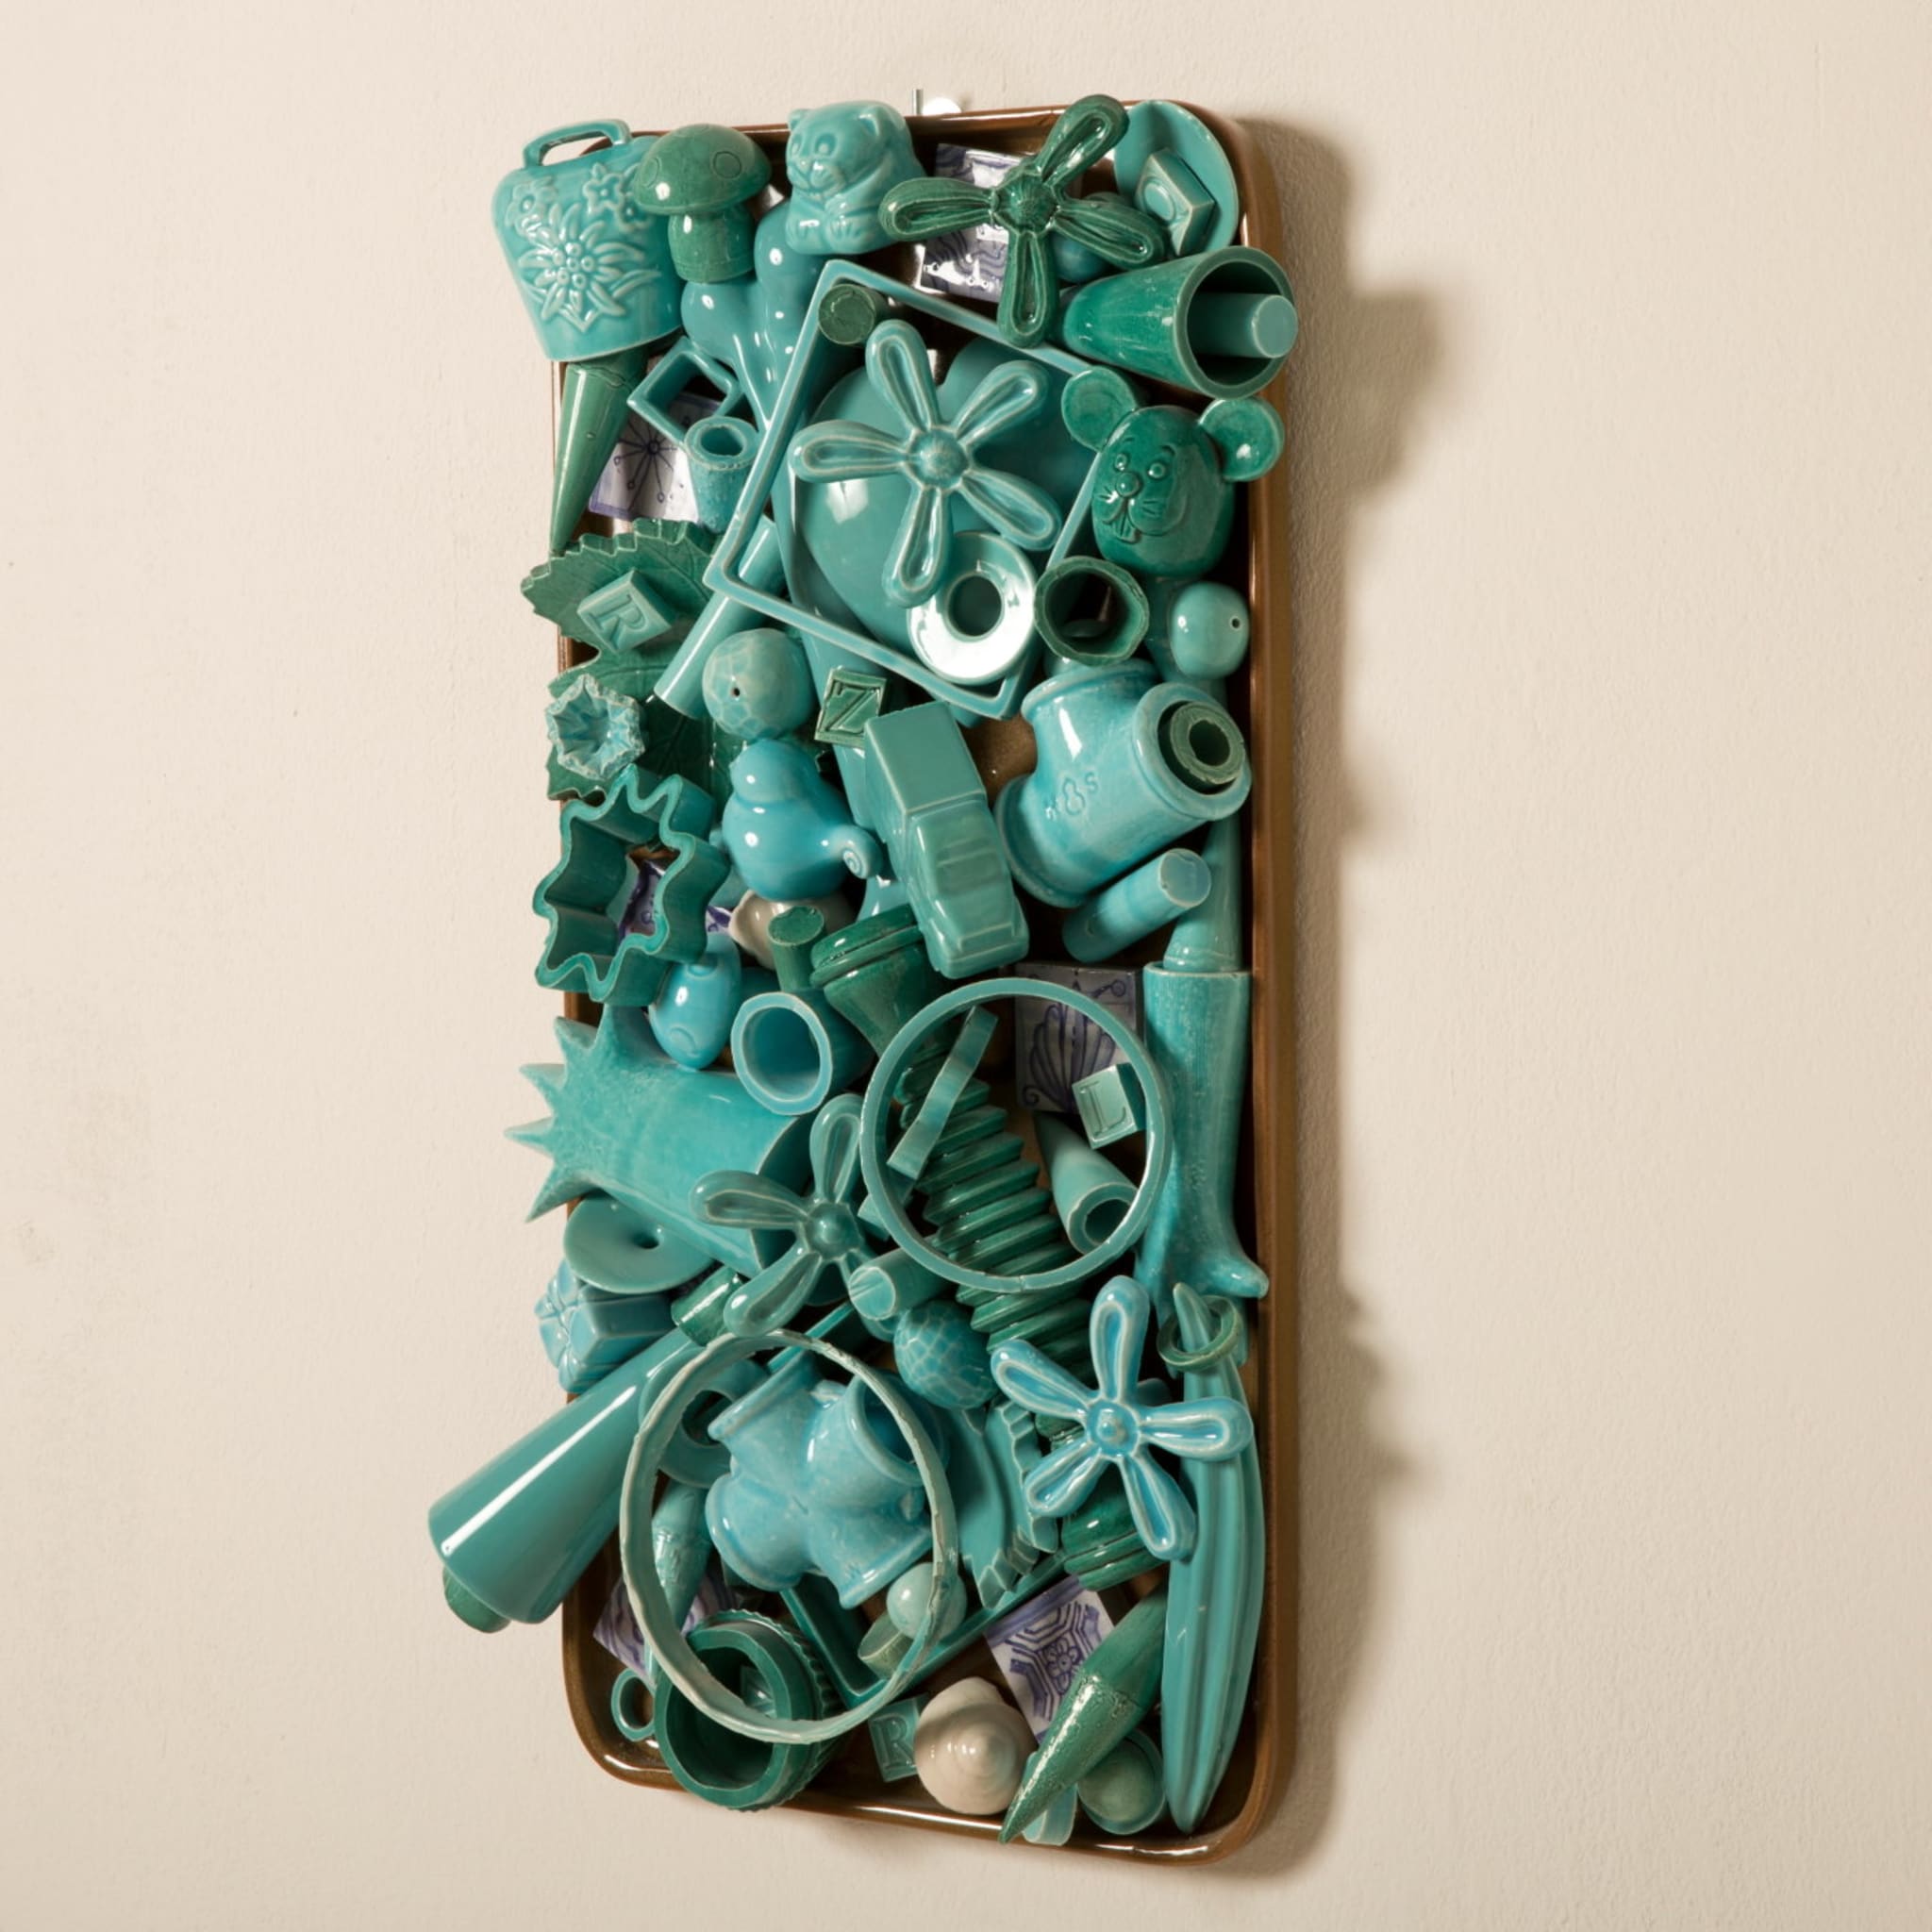 Turquoise Charms Wall Sculpture - Alternative view 2